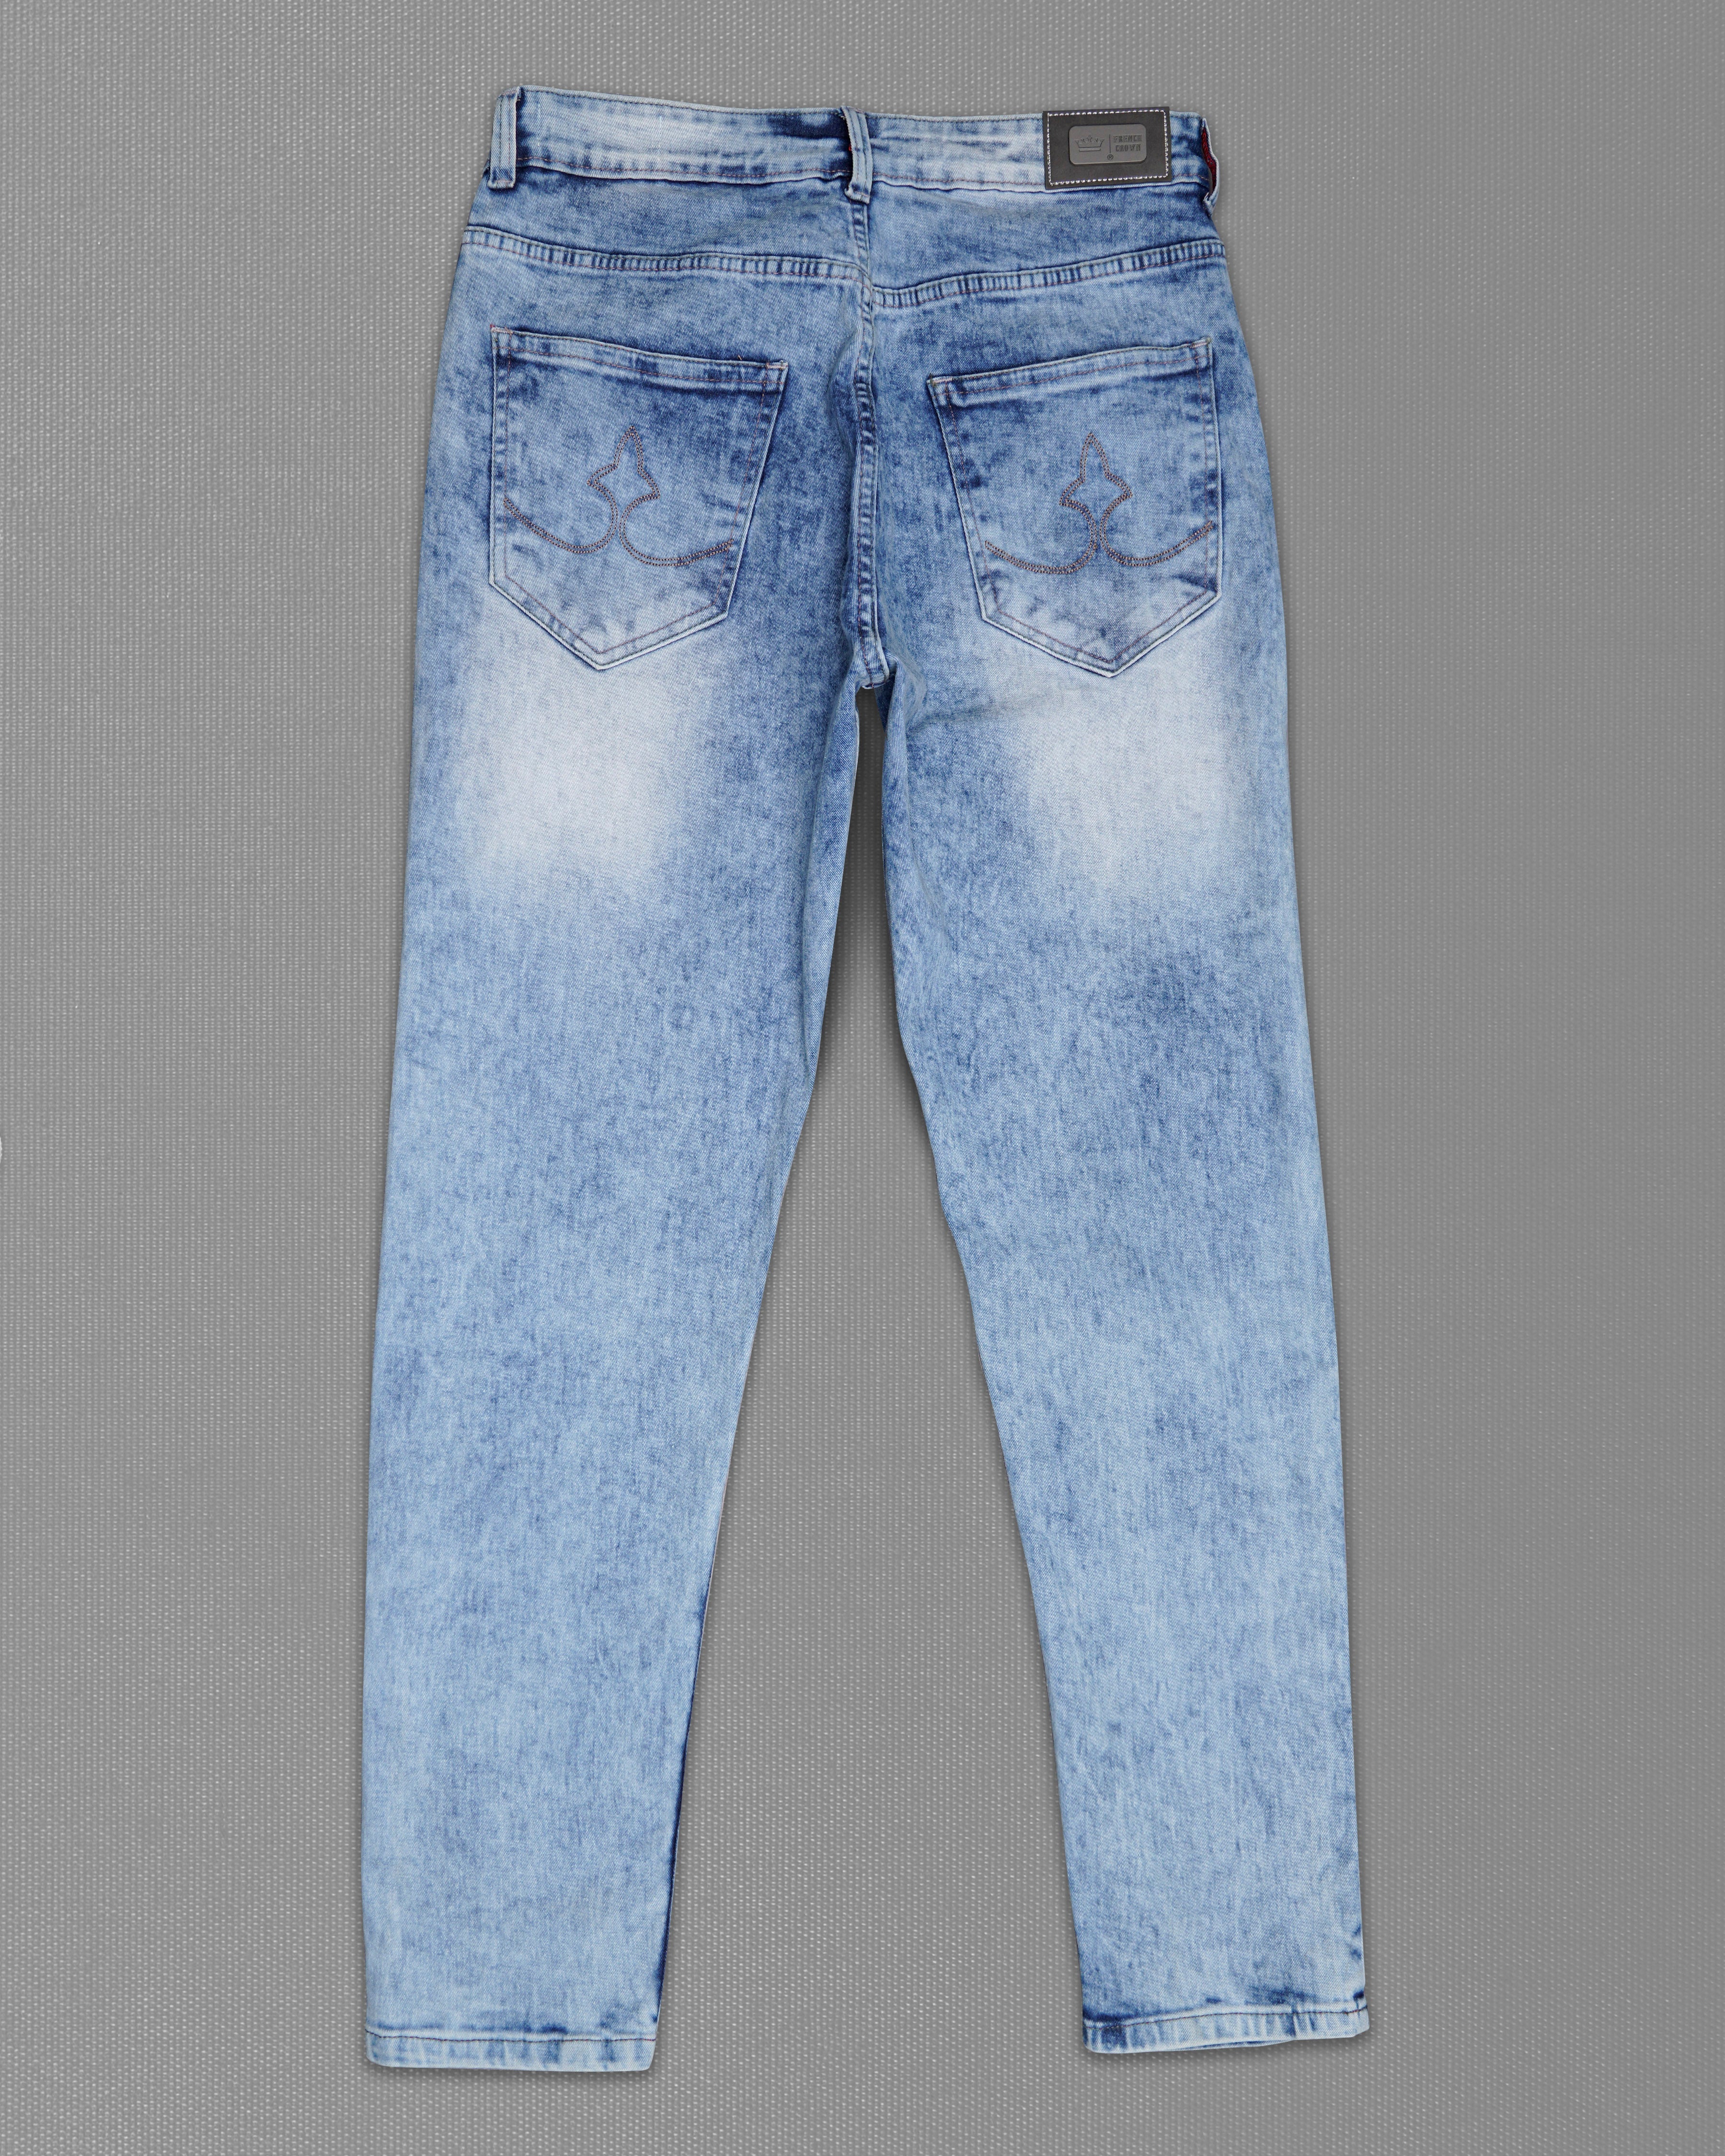 Wild Blue Acid Wash Hand Painted Stretchable Denim J178-ART001-30, J178-ART001-32, J178-ART001-34, J178-ART001-36, J178-ART001-38, J178-ART001-40